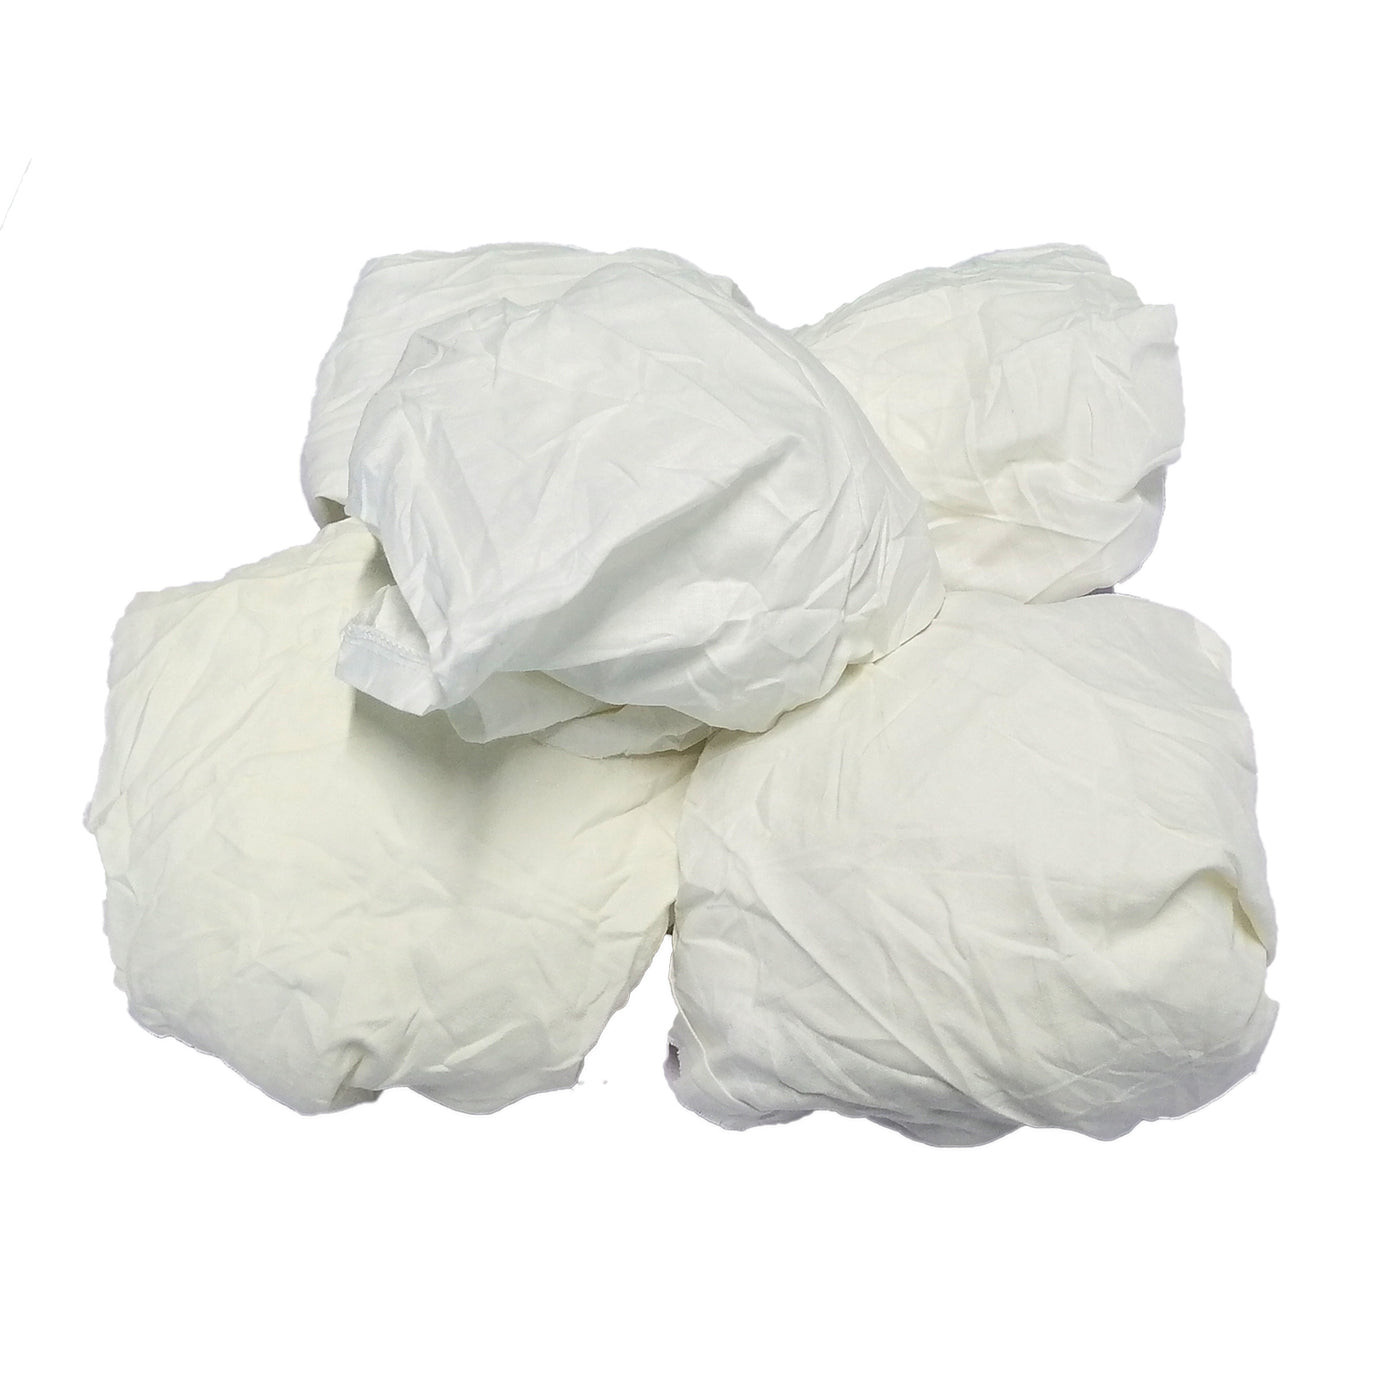 White Cotton Recycled Sheeting Rags Wiping Rags - 10 lbs. Box ...